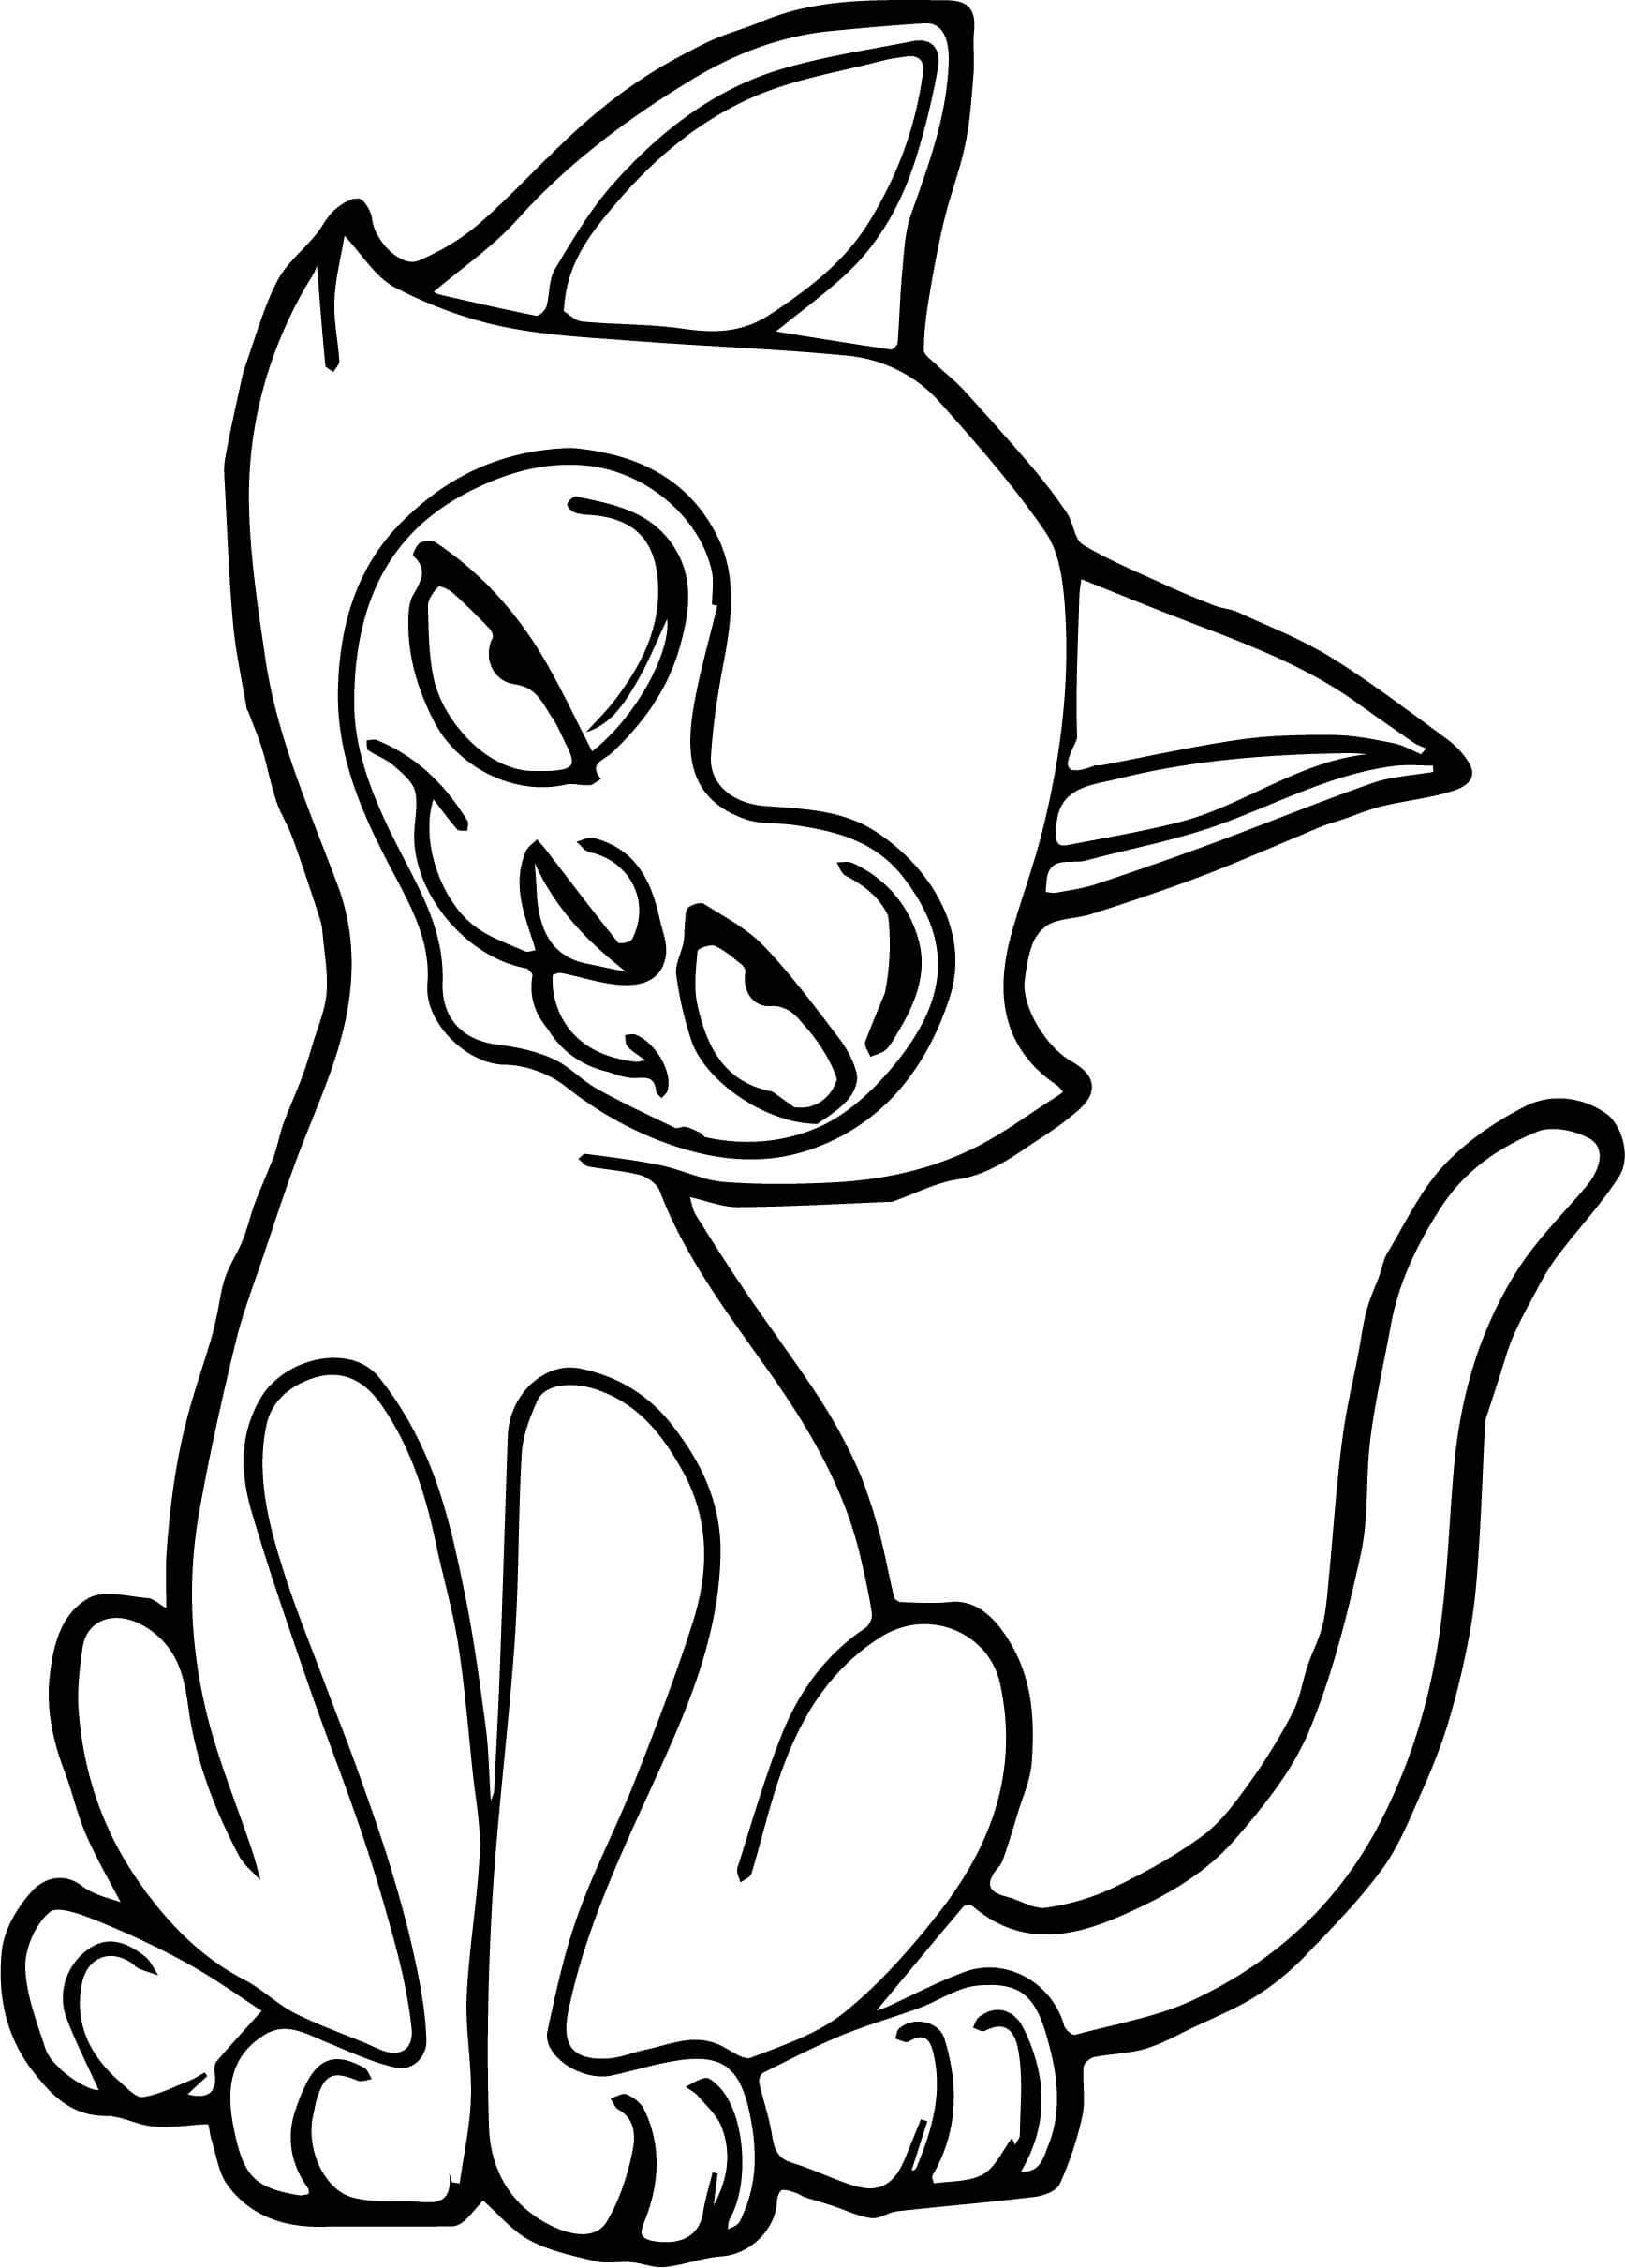 Sideways Cat Coloring Page